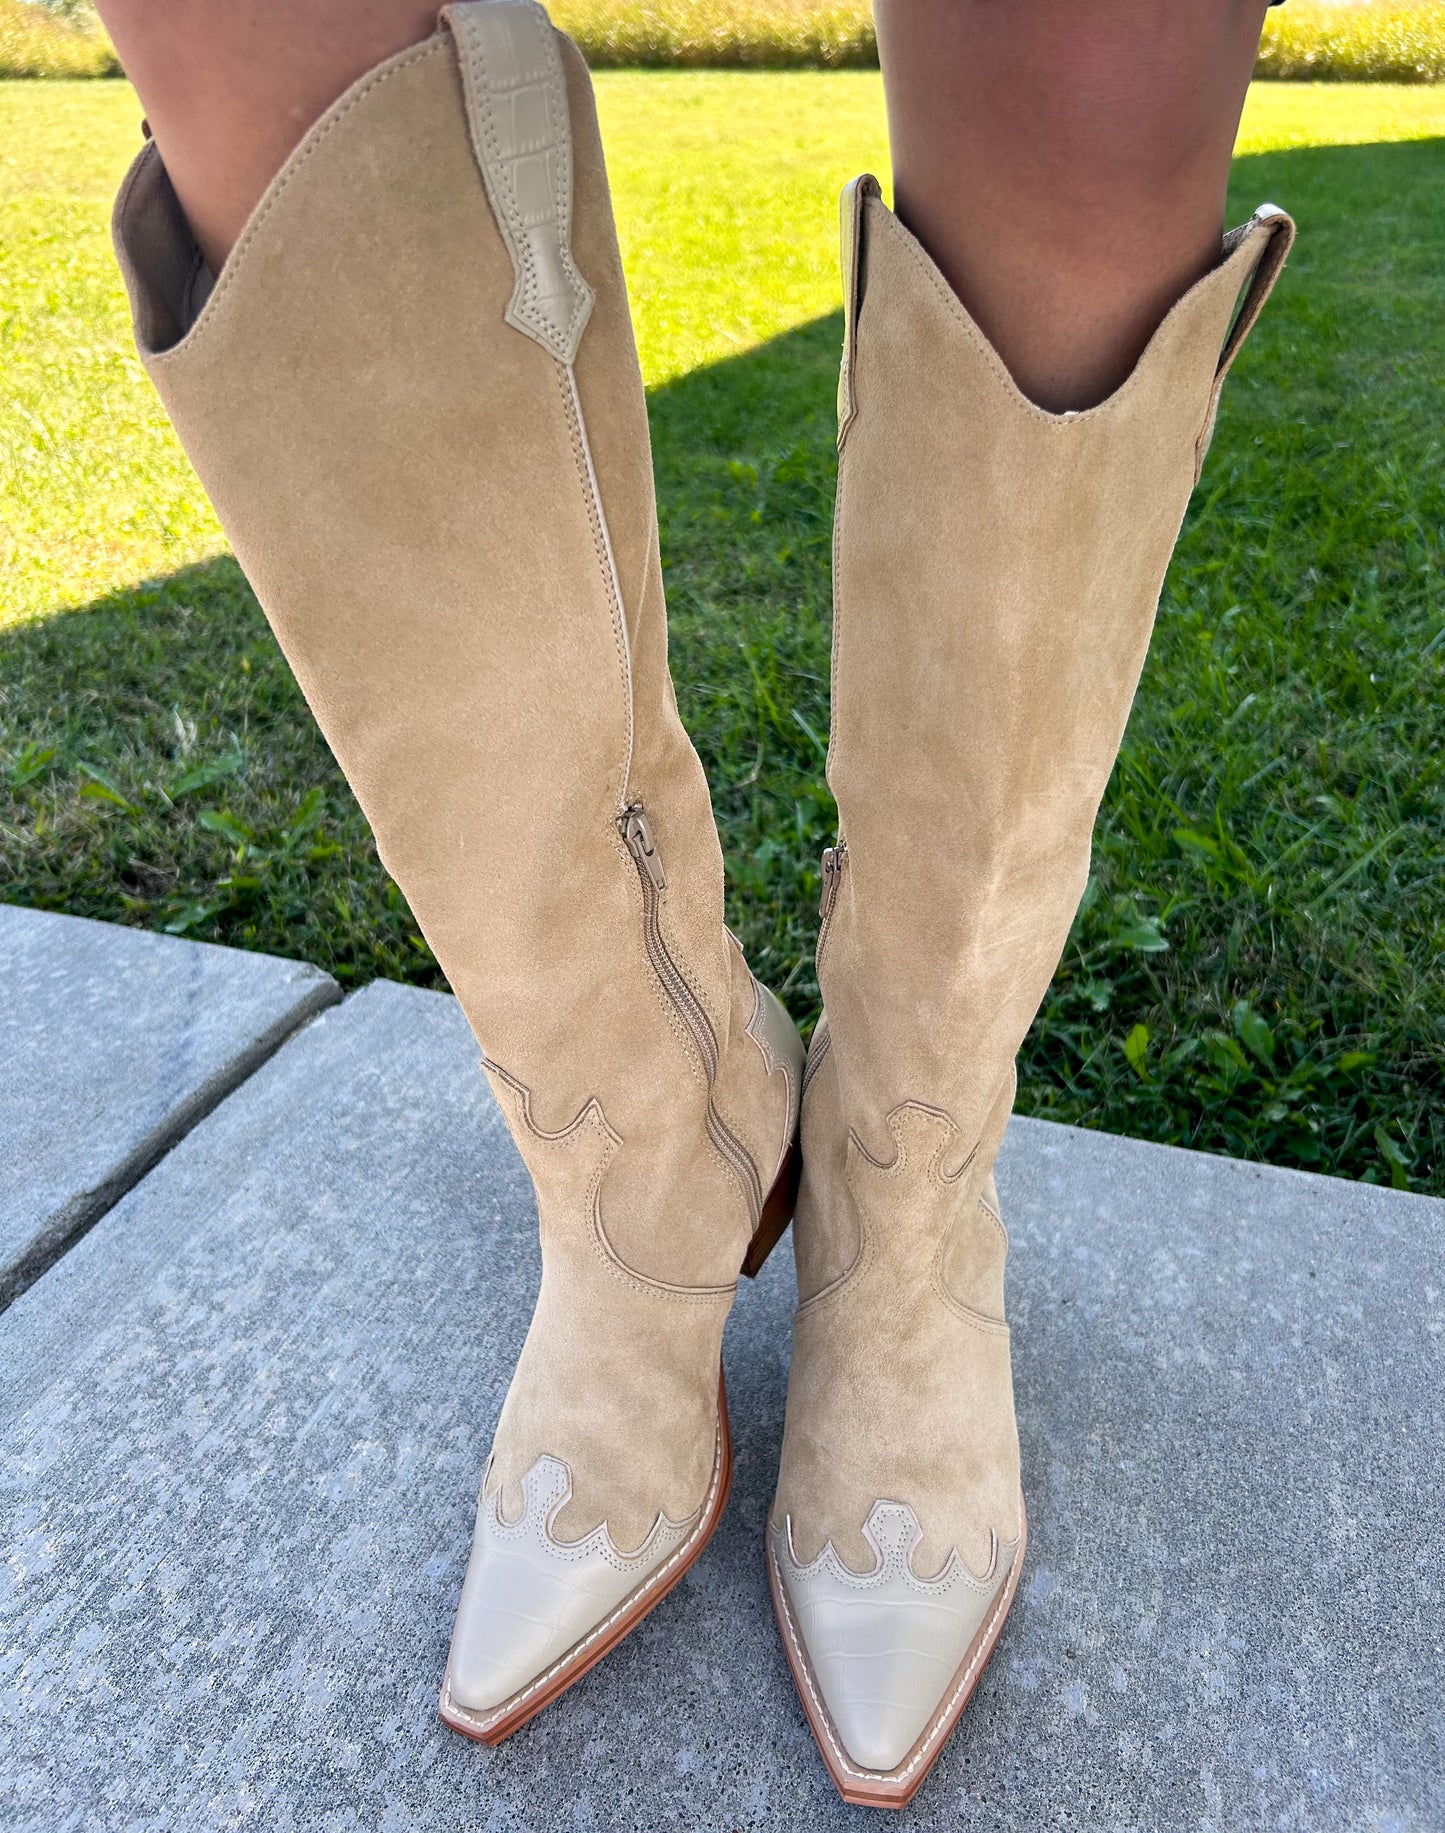 Load image into Gallery viewer, Matisse: Belmont Western Boot - Natural
